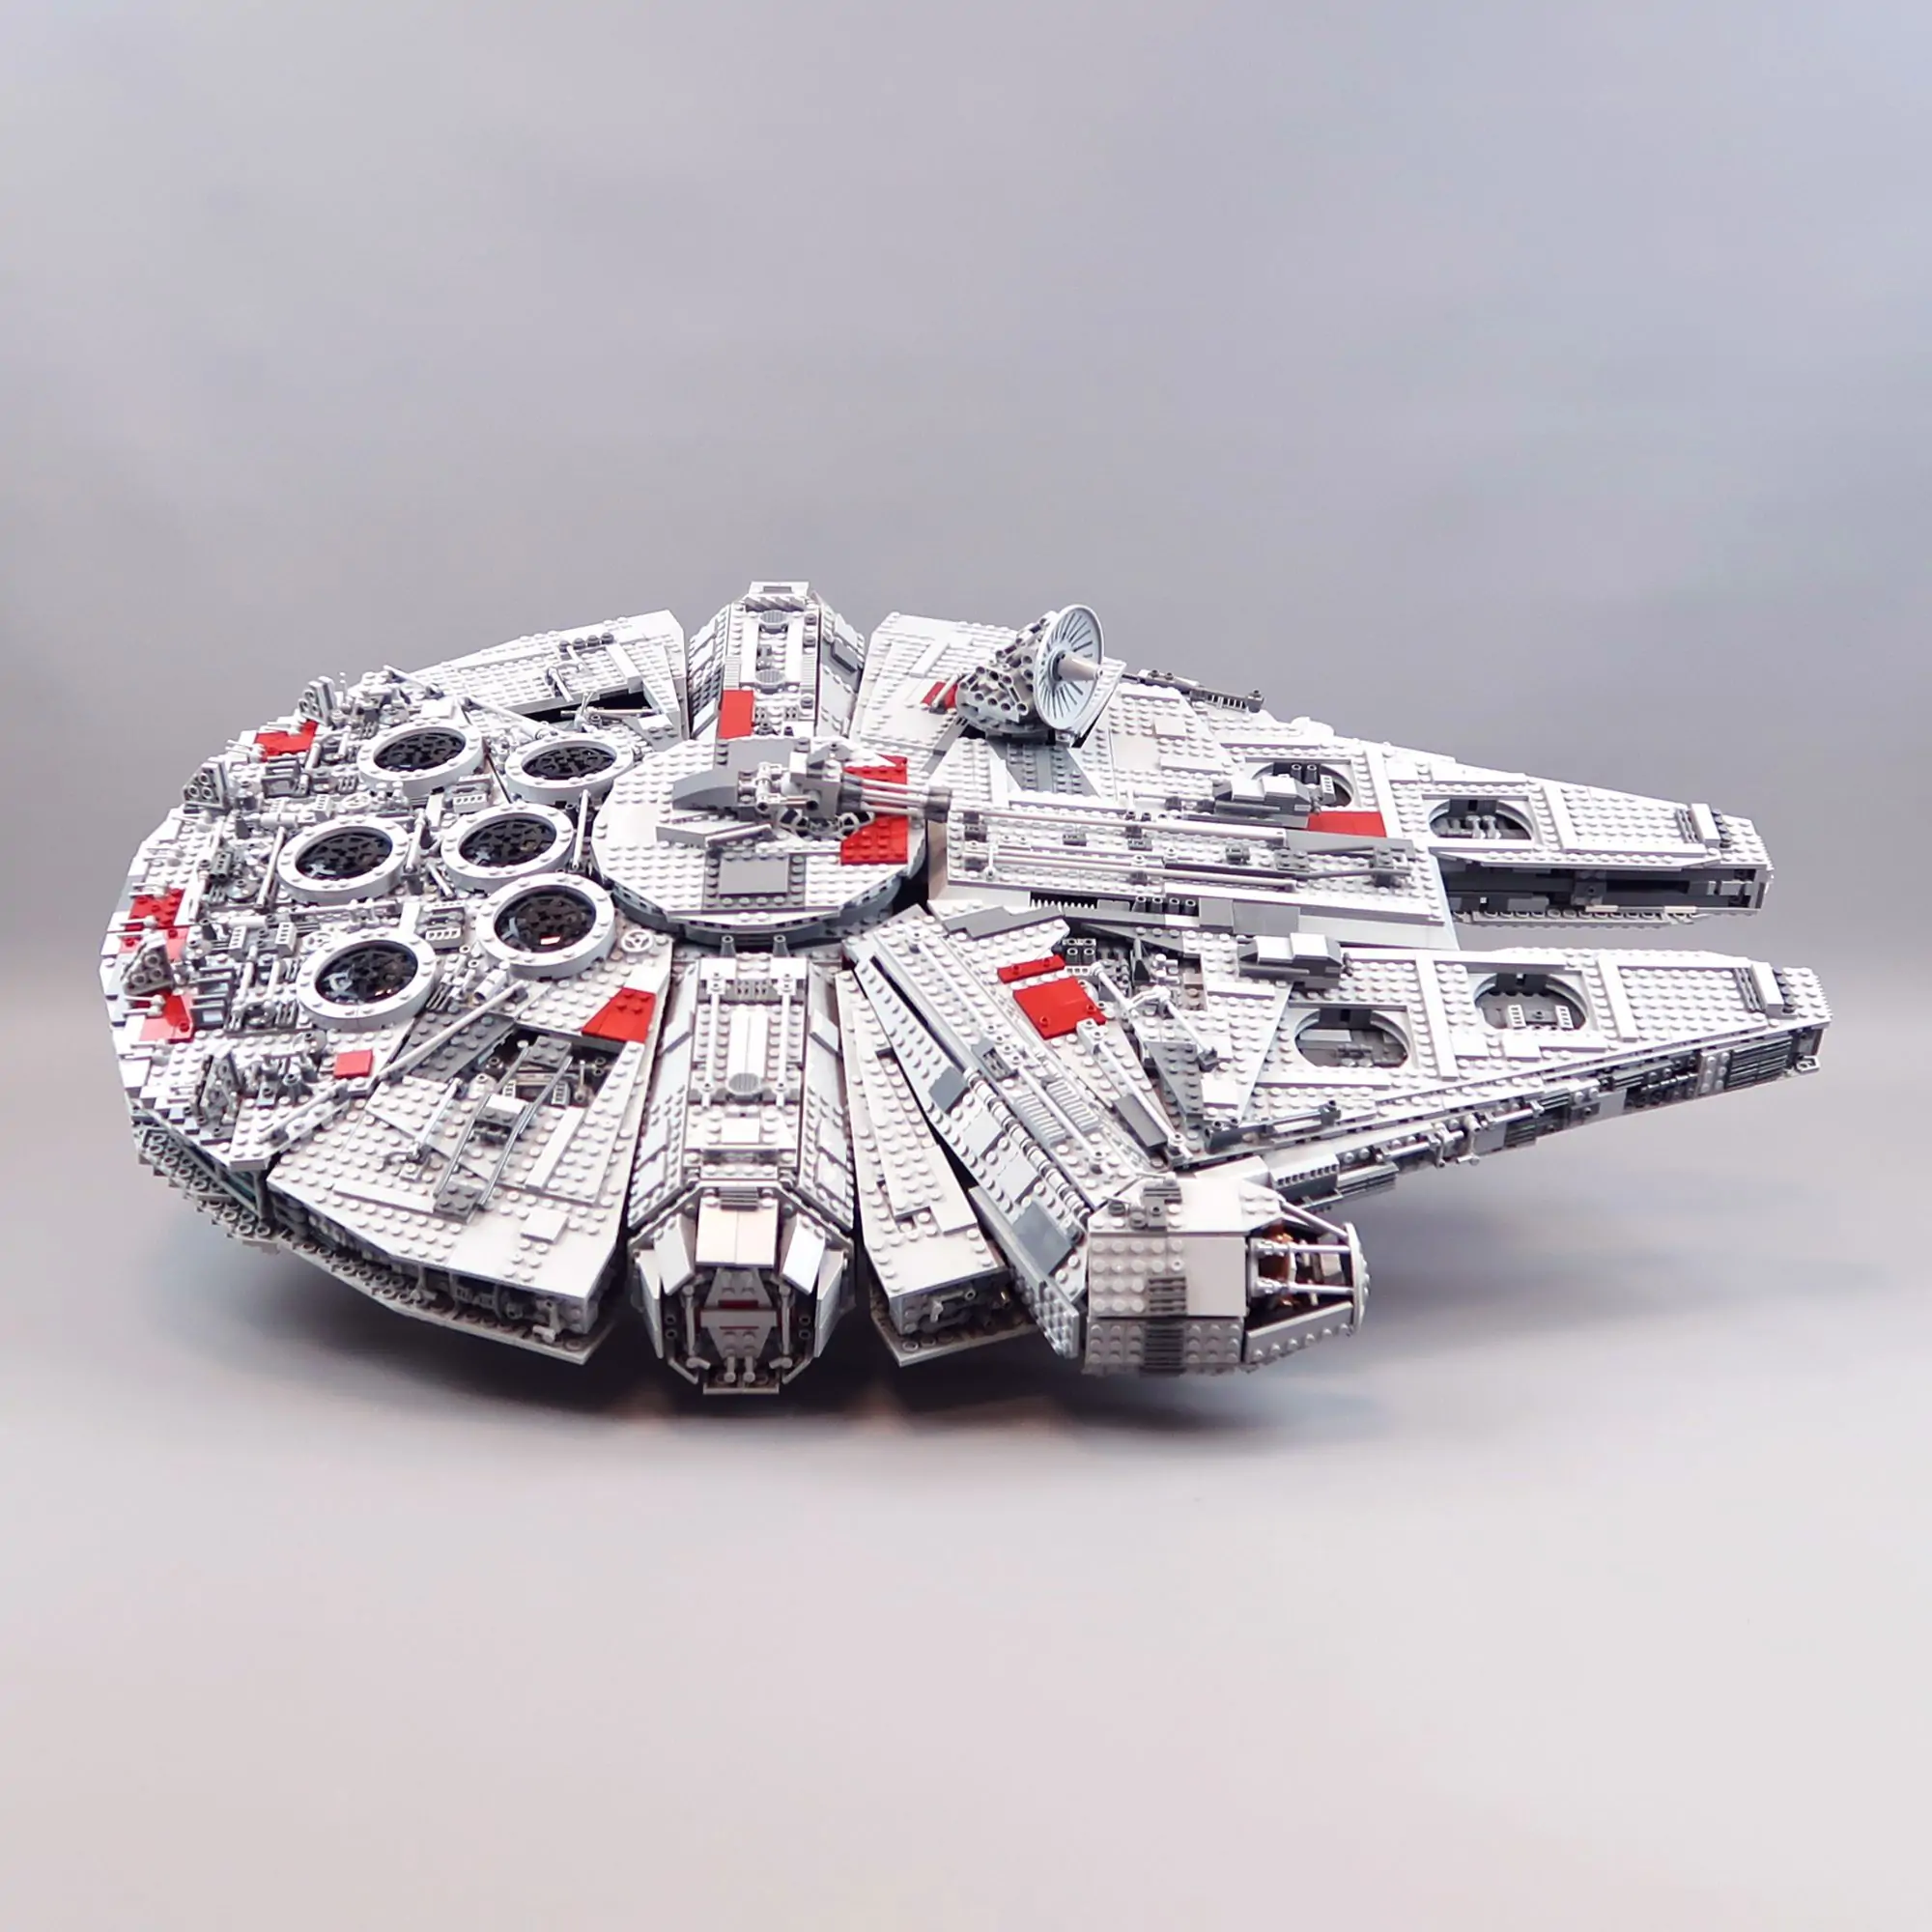 Lego Support Base 10179 / 75192 Millennium Falcon UCS Display Stand Made in  FRANCE -  Israel